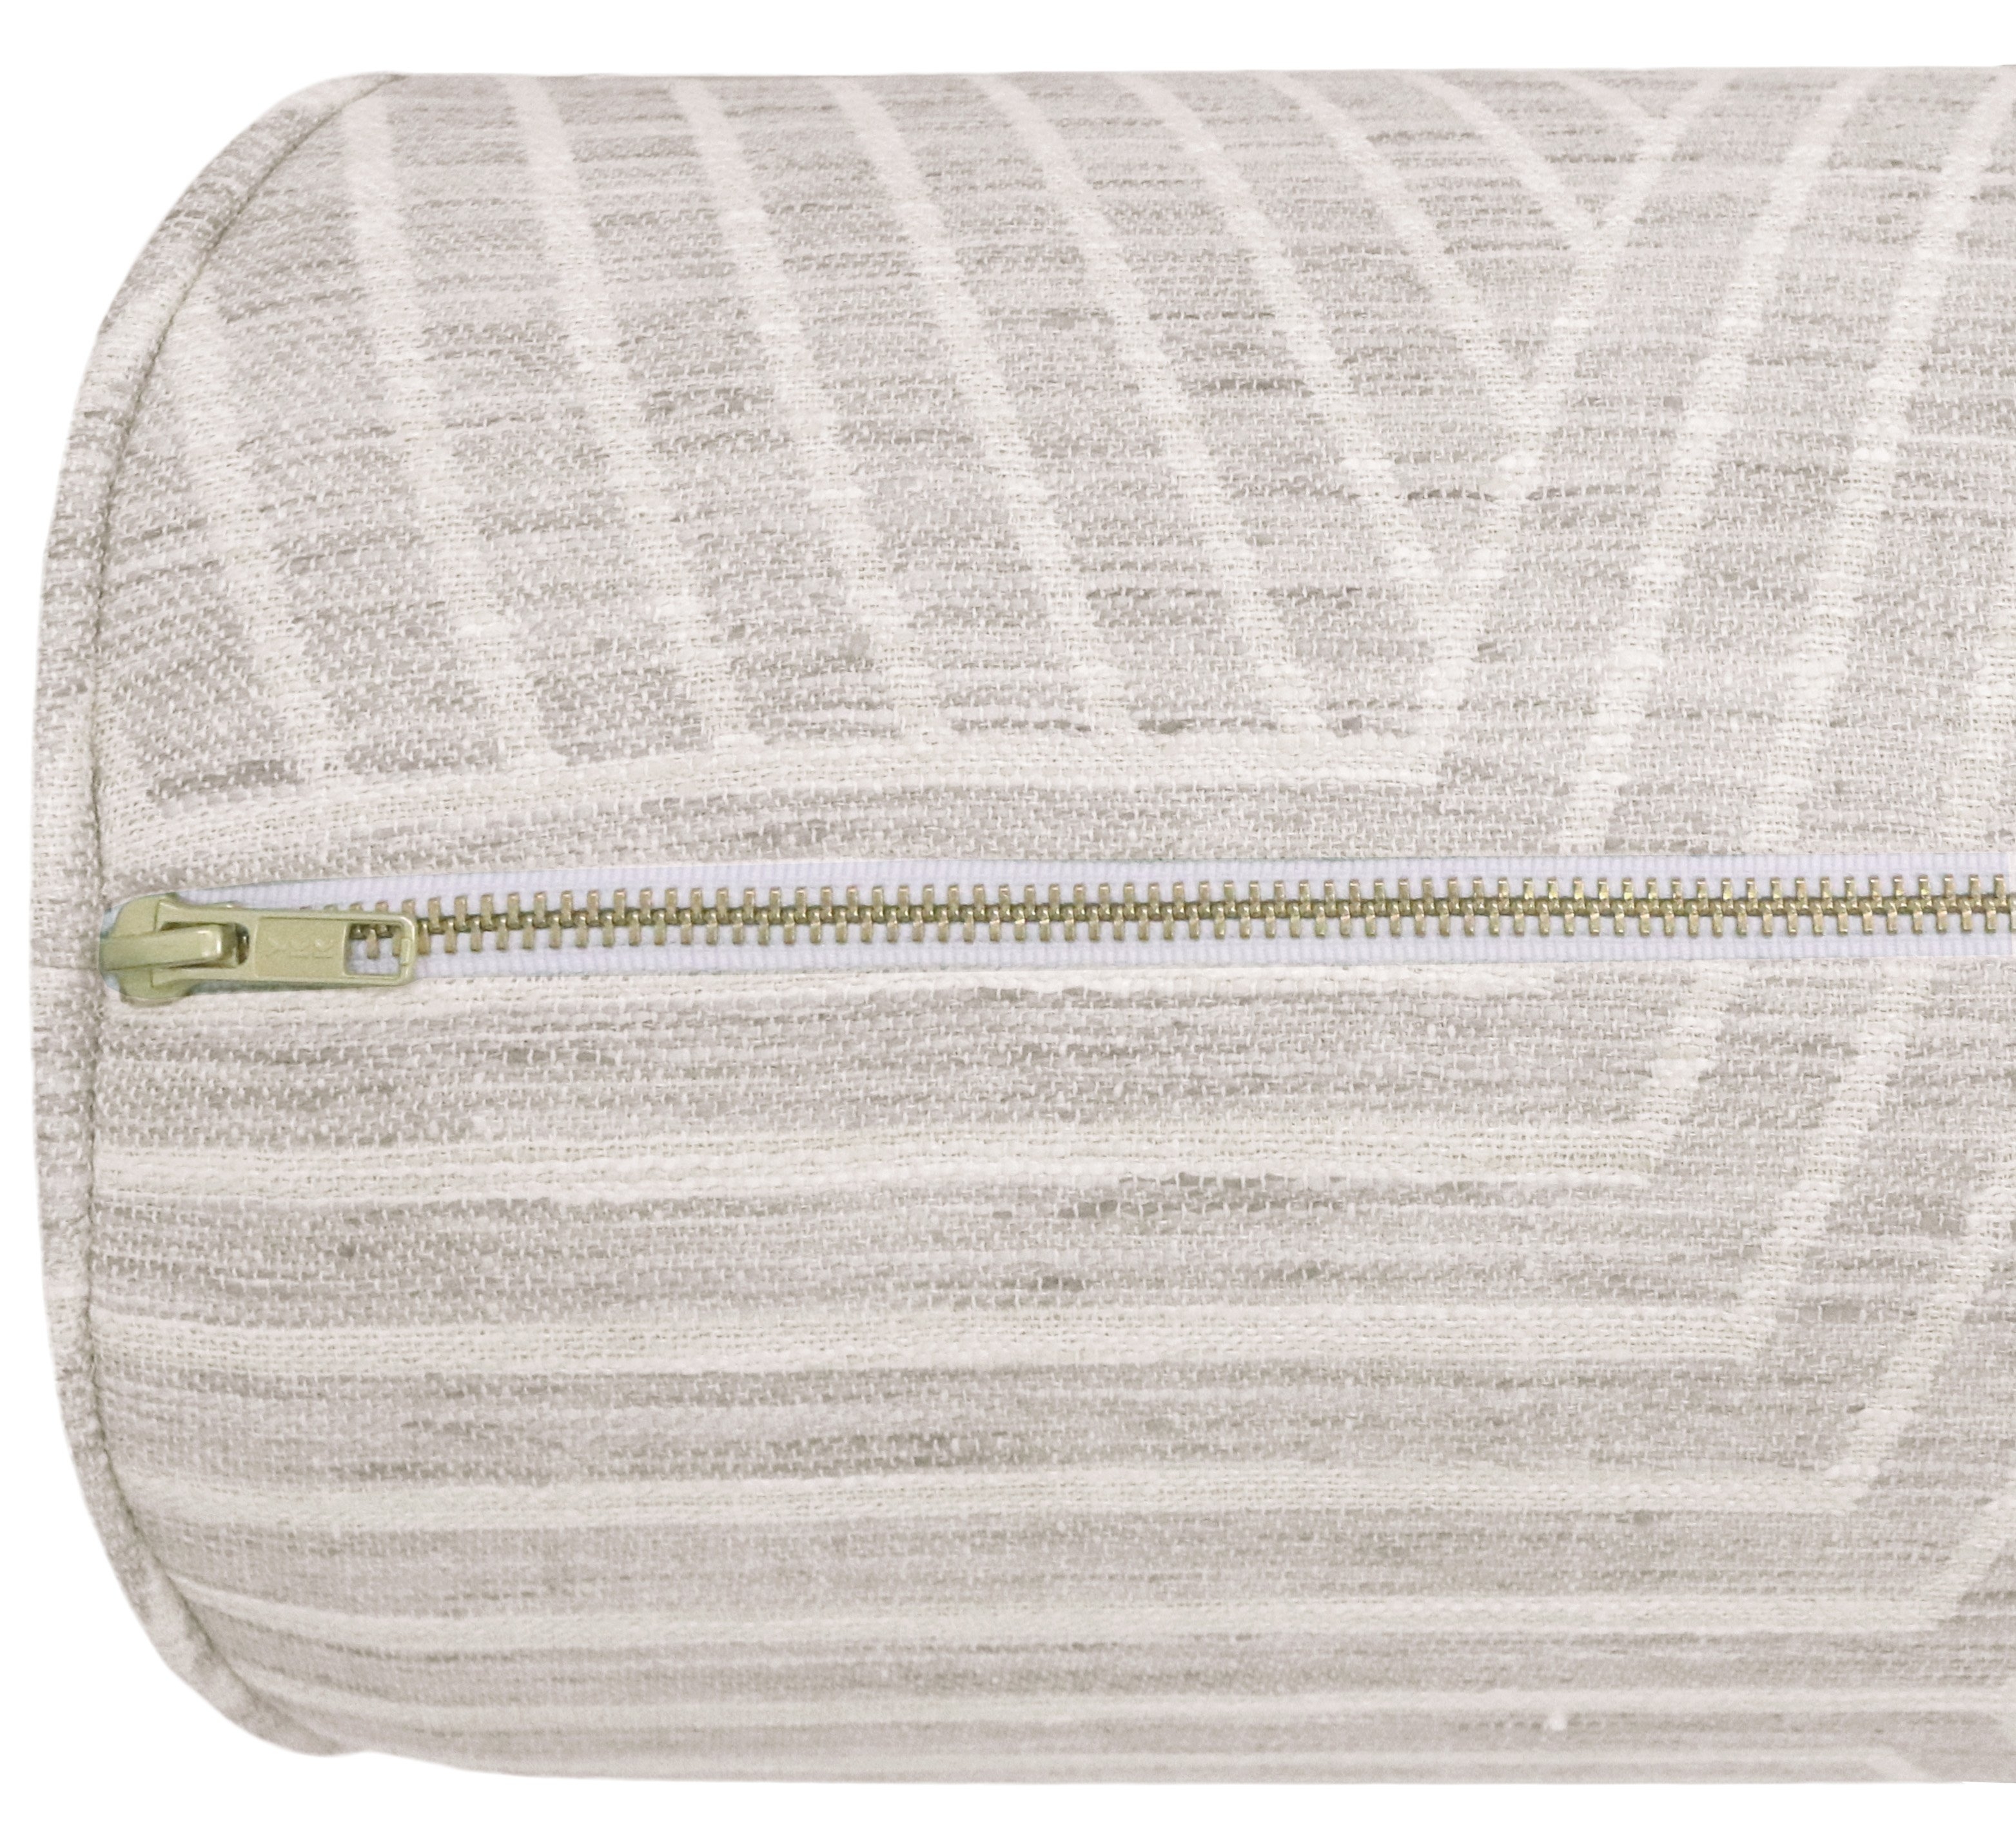 THE BOLSTER :: LABYRINTH LINEN // OYSTER - KING // 9" X 48" - Image 6